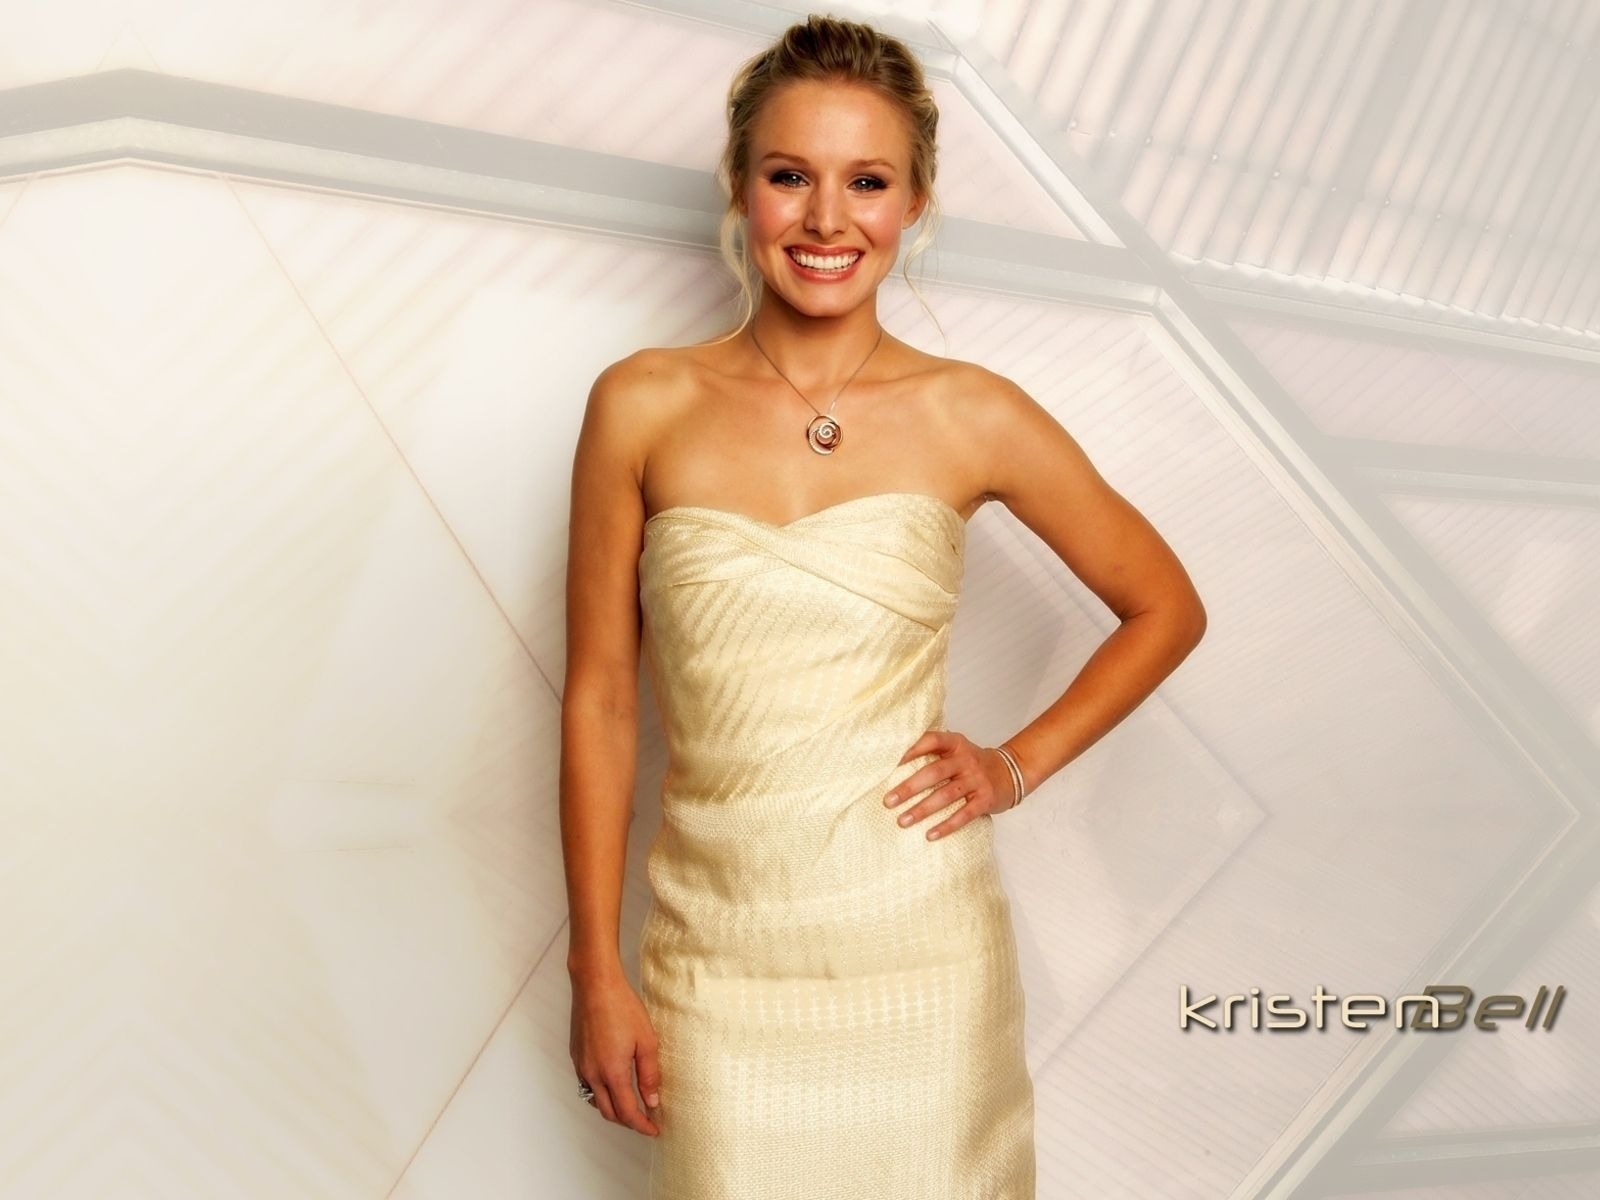 Kristen Bell #043 - 1600x1200 Wallpapers Pictures Photos Images